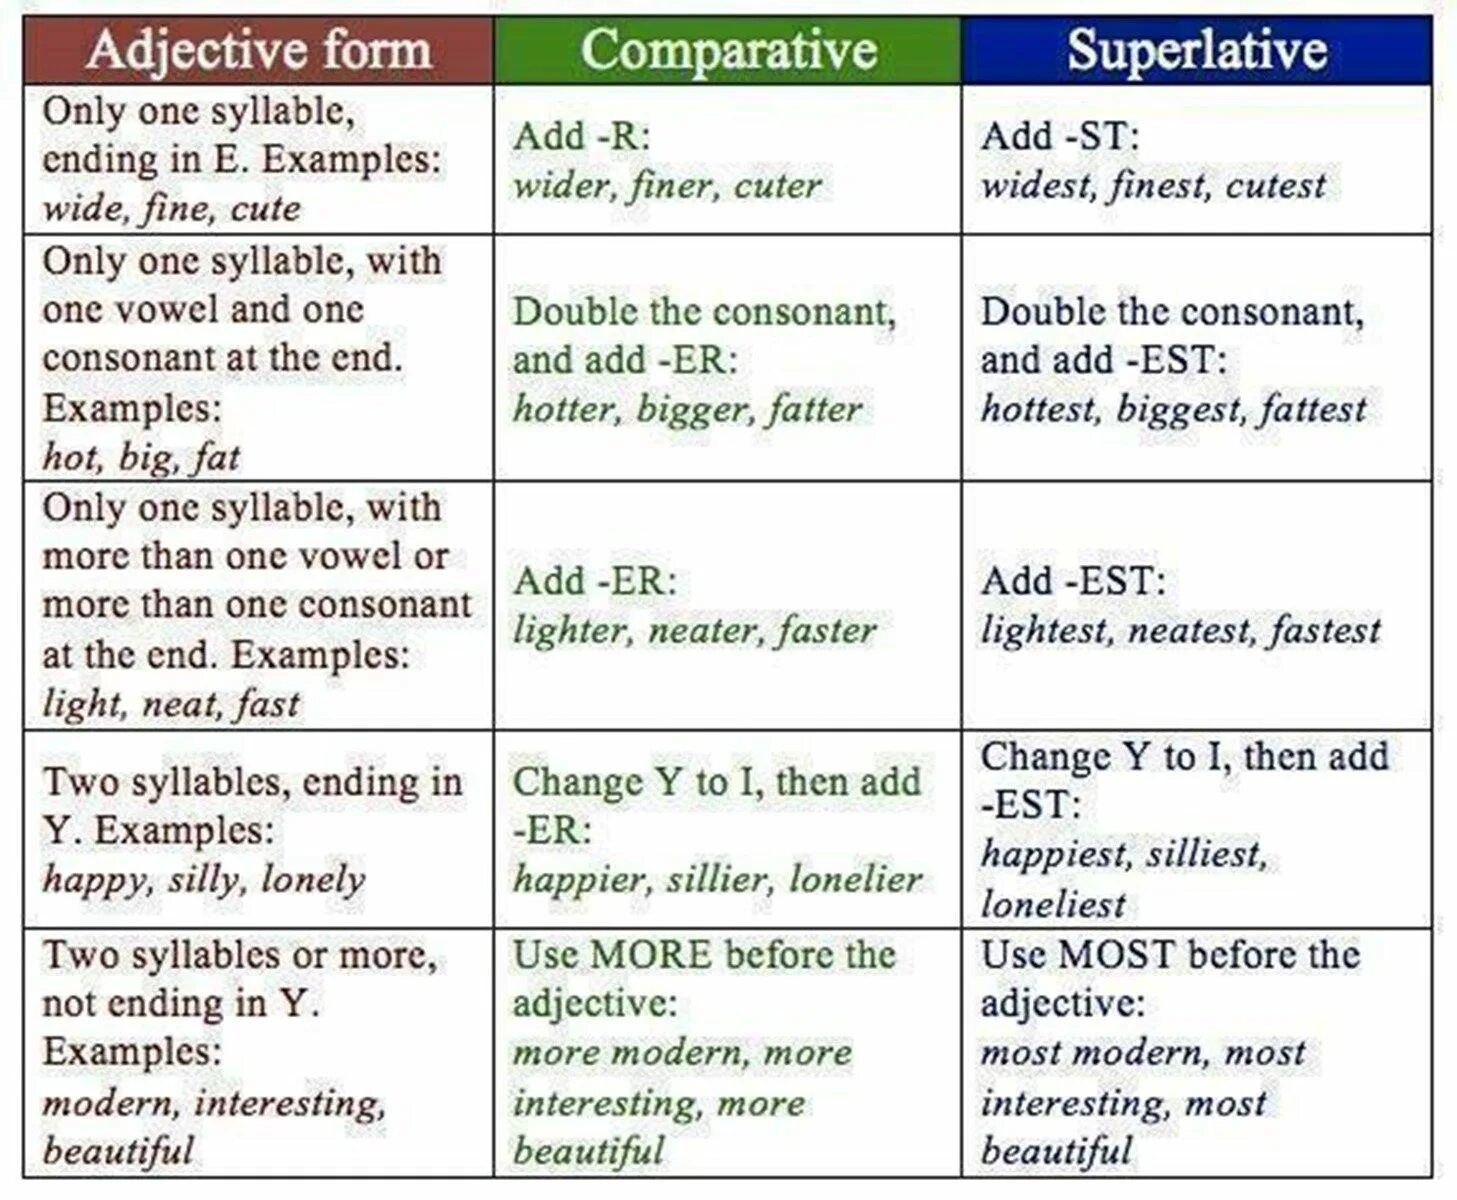 Comparatives and Superlatives правило таблица. Adjective Comparative Superlative таблица. Английский Comparative and Superlative. Comparatives and Superlatives примеры. Английский язык comparative superlative